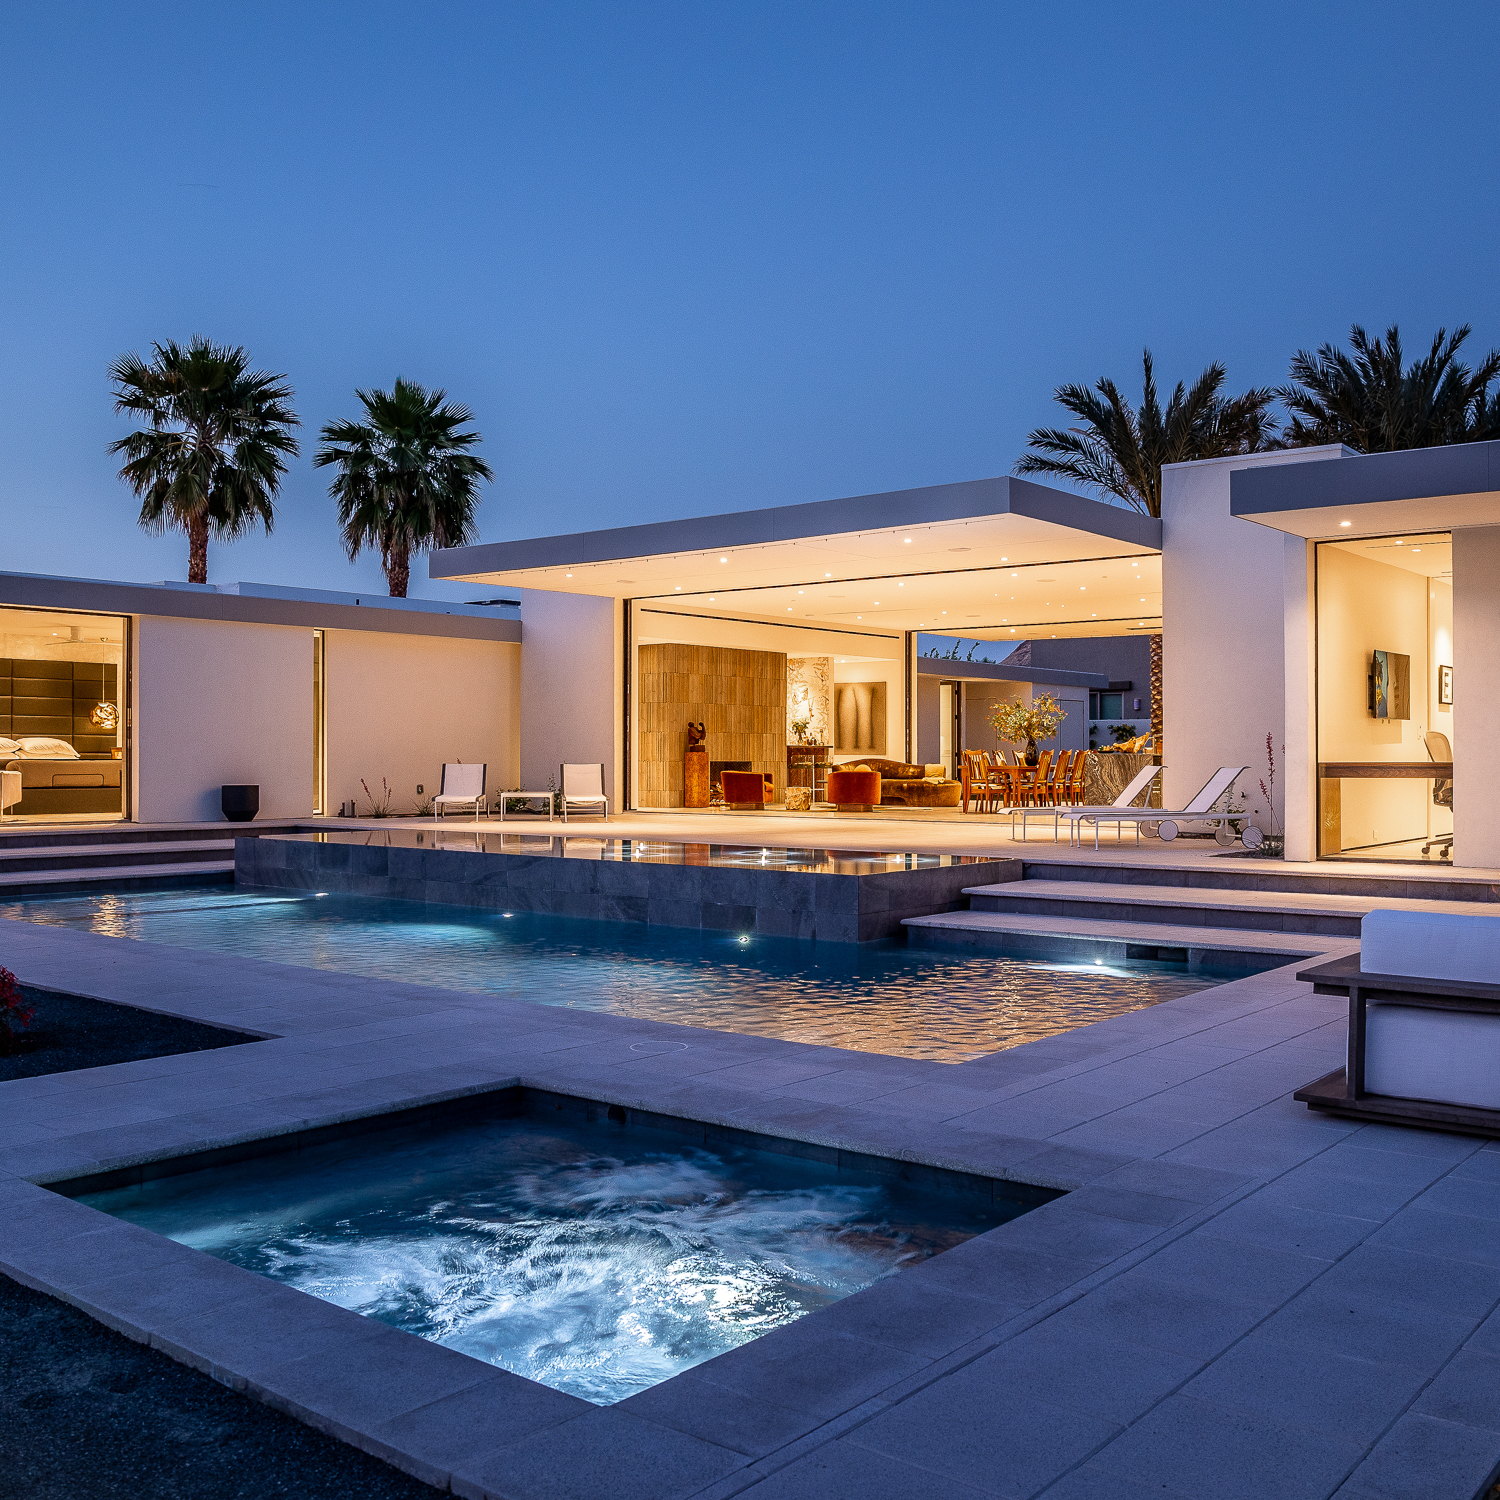 Luxury home photographed at dusk with glowing warm lights inside the home. Pool lights and jacuzzi are on.